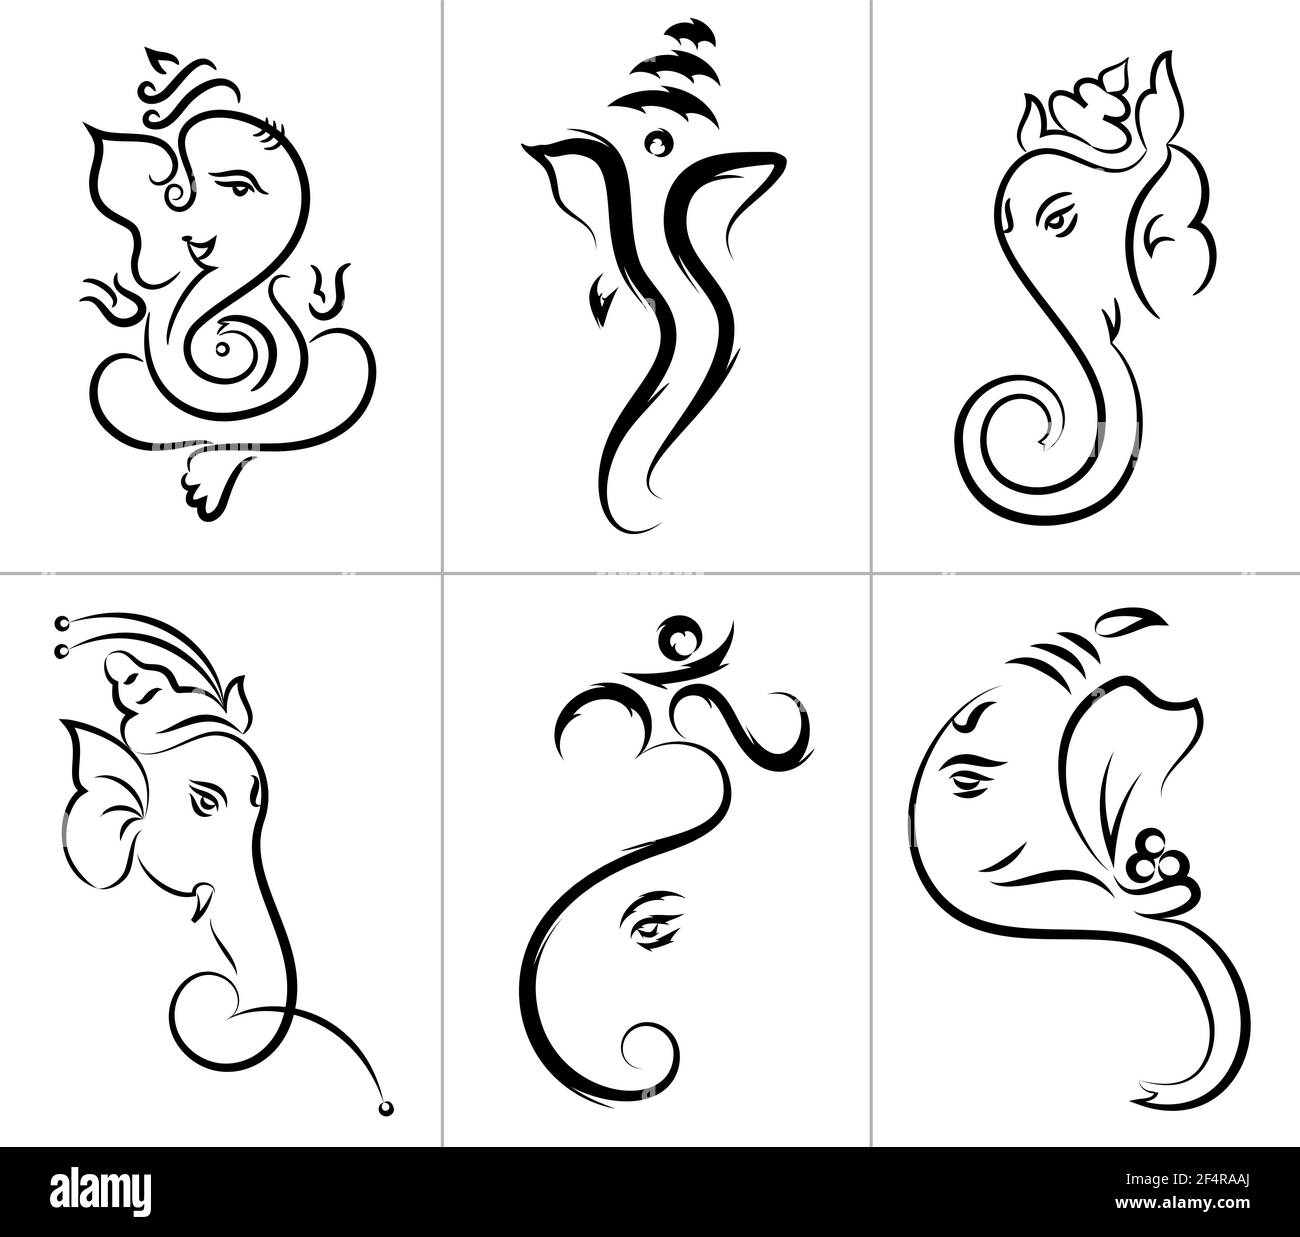 Ganesha The Lord Of Wisdom, Various Design Collection Vector Illustration Stock Vector